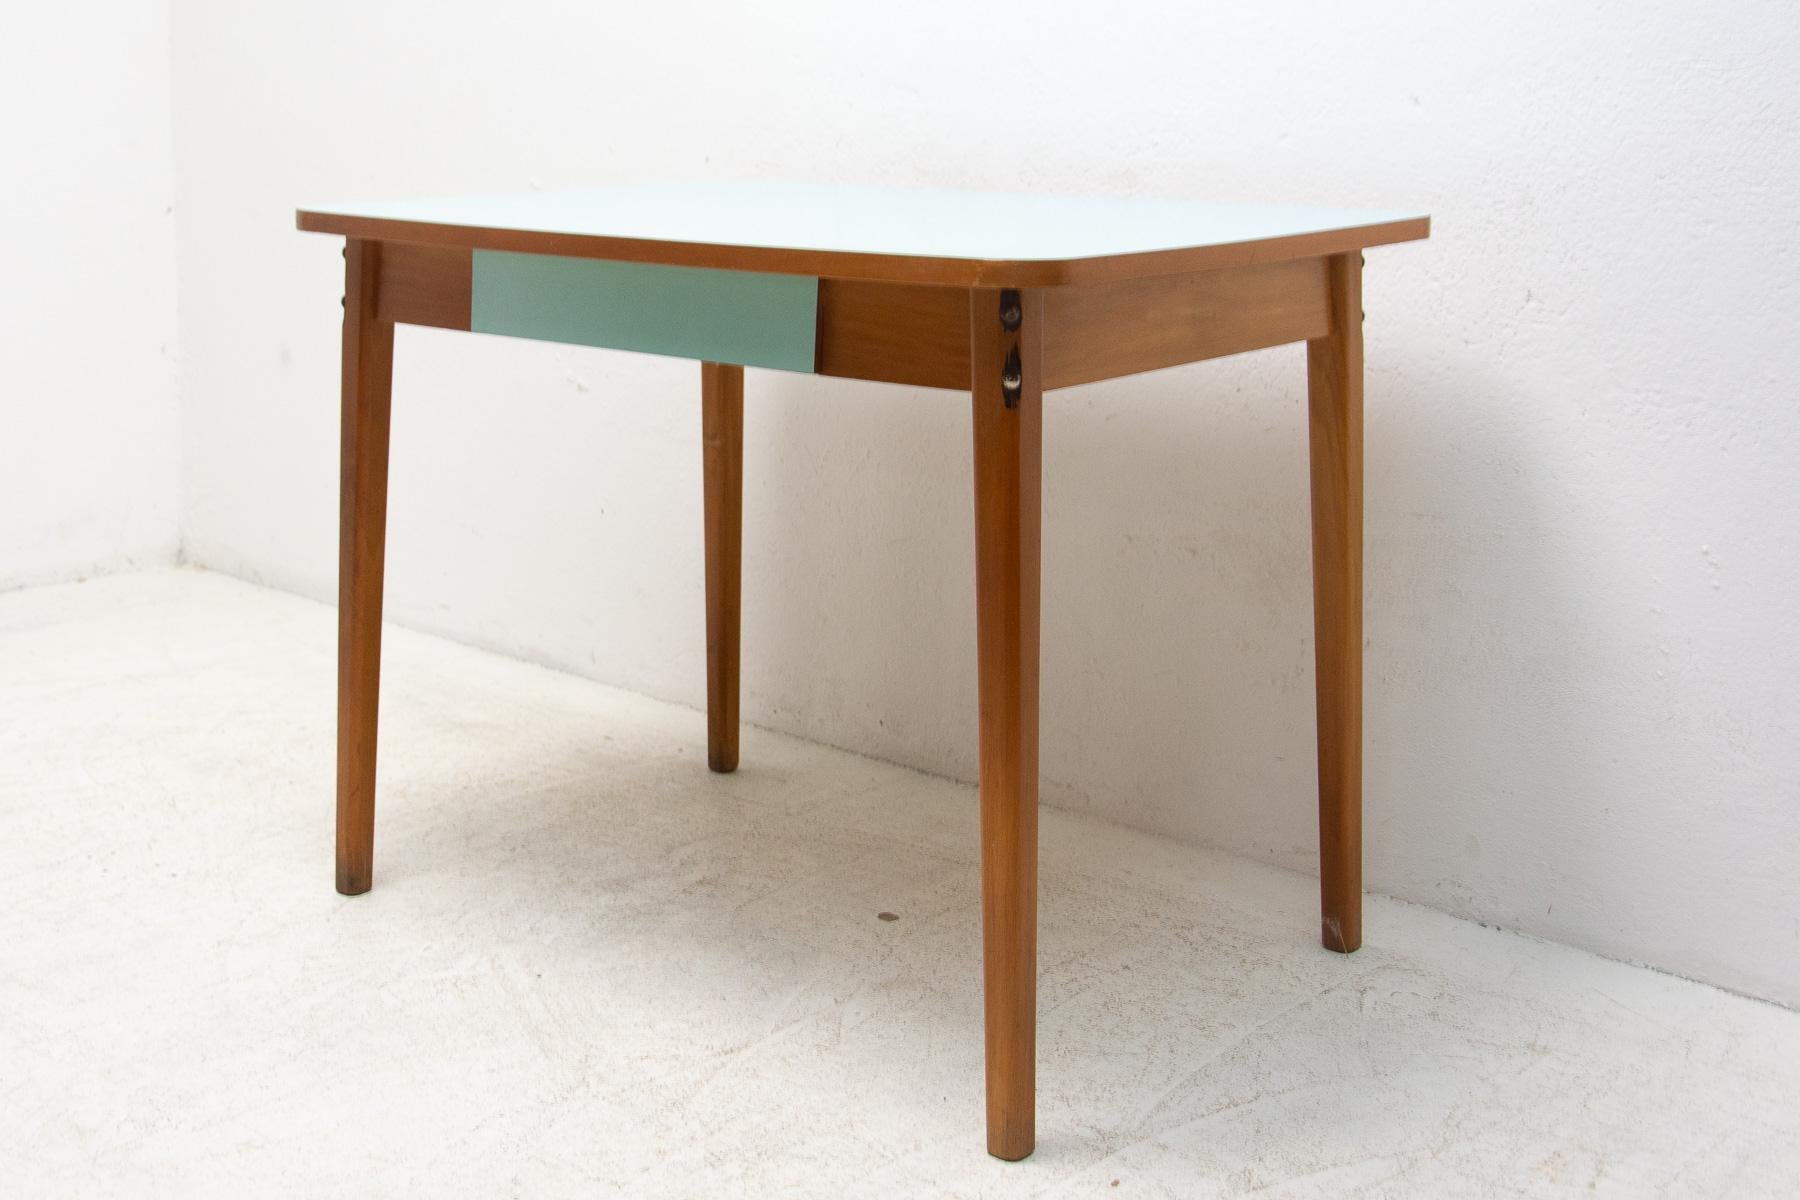 Mid Century central table with a formica plate, beech legs and one drawer. It can be used as a writing desk as well. It was made in the former Czechoslovakia in the 1960´s. In good Vintage condition, shows slight signs of age and using.

Measures: